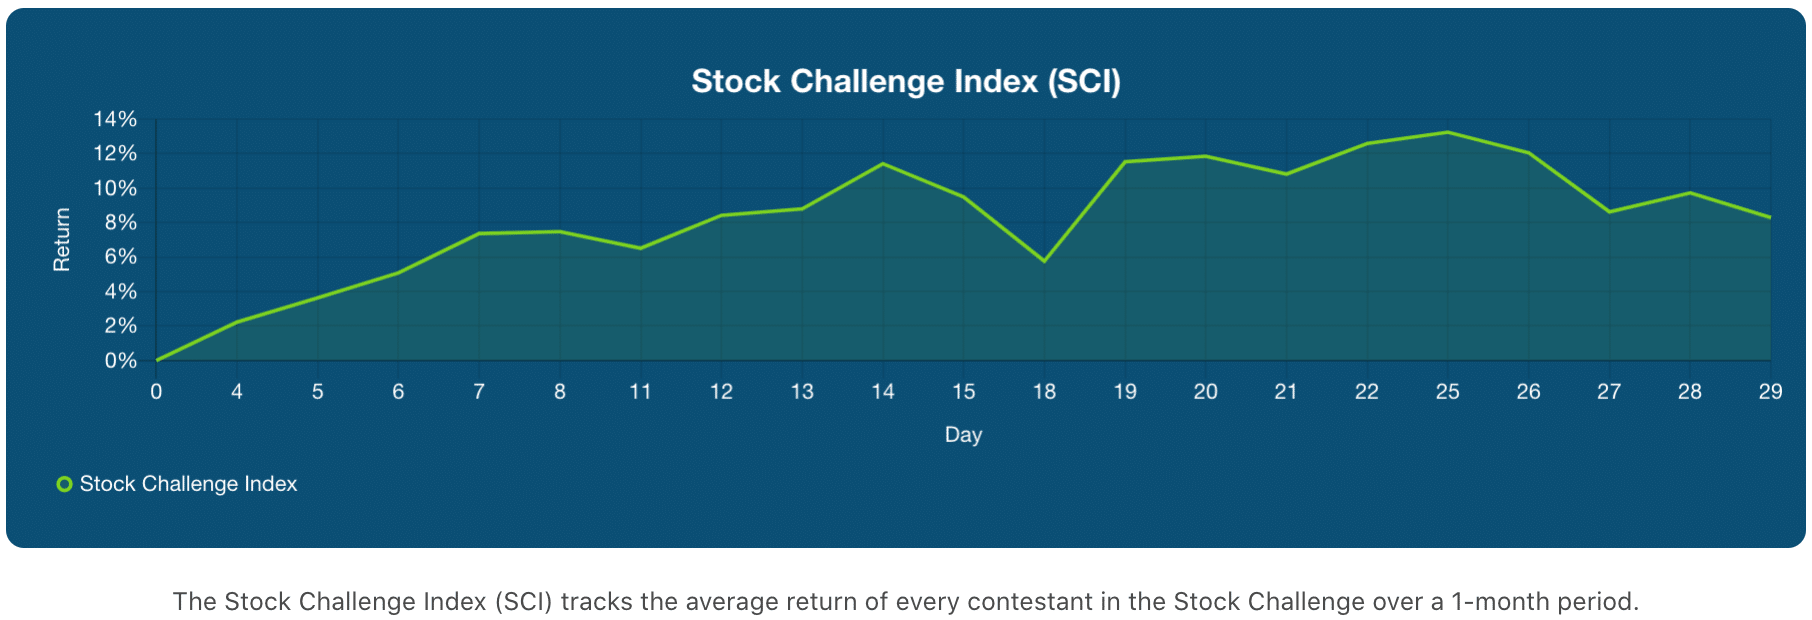 stock challenge index as of january 29, 2021